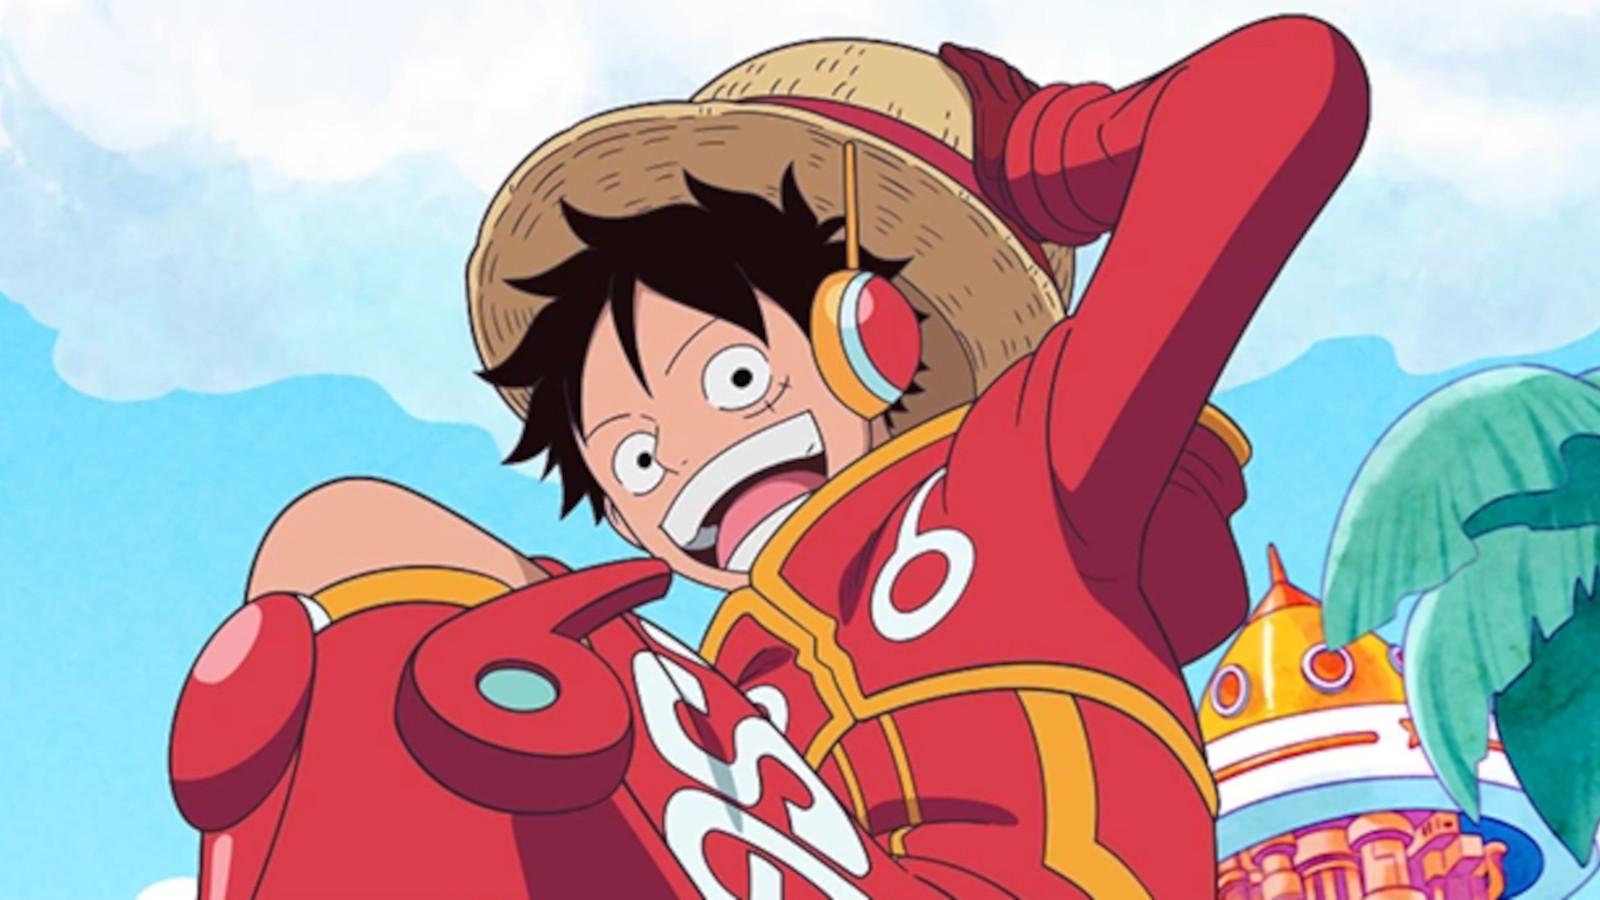 Luffy in One Piece